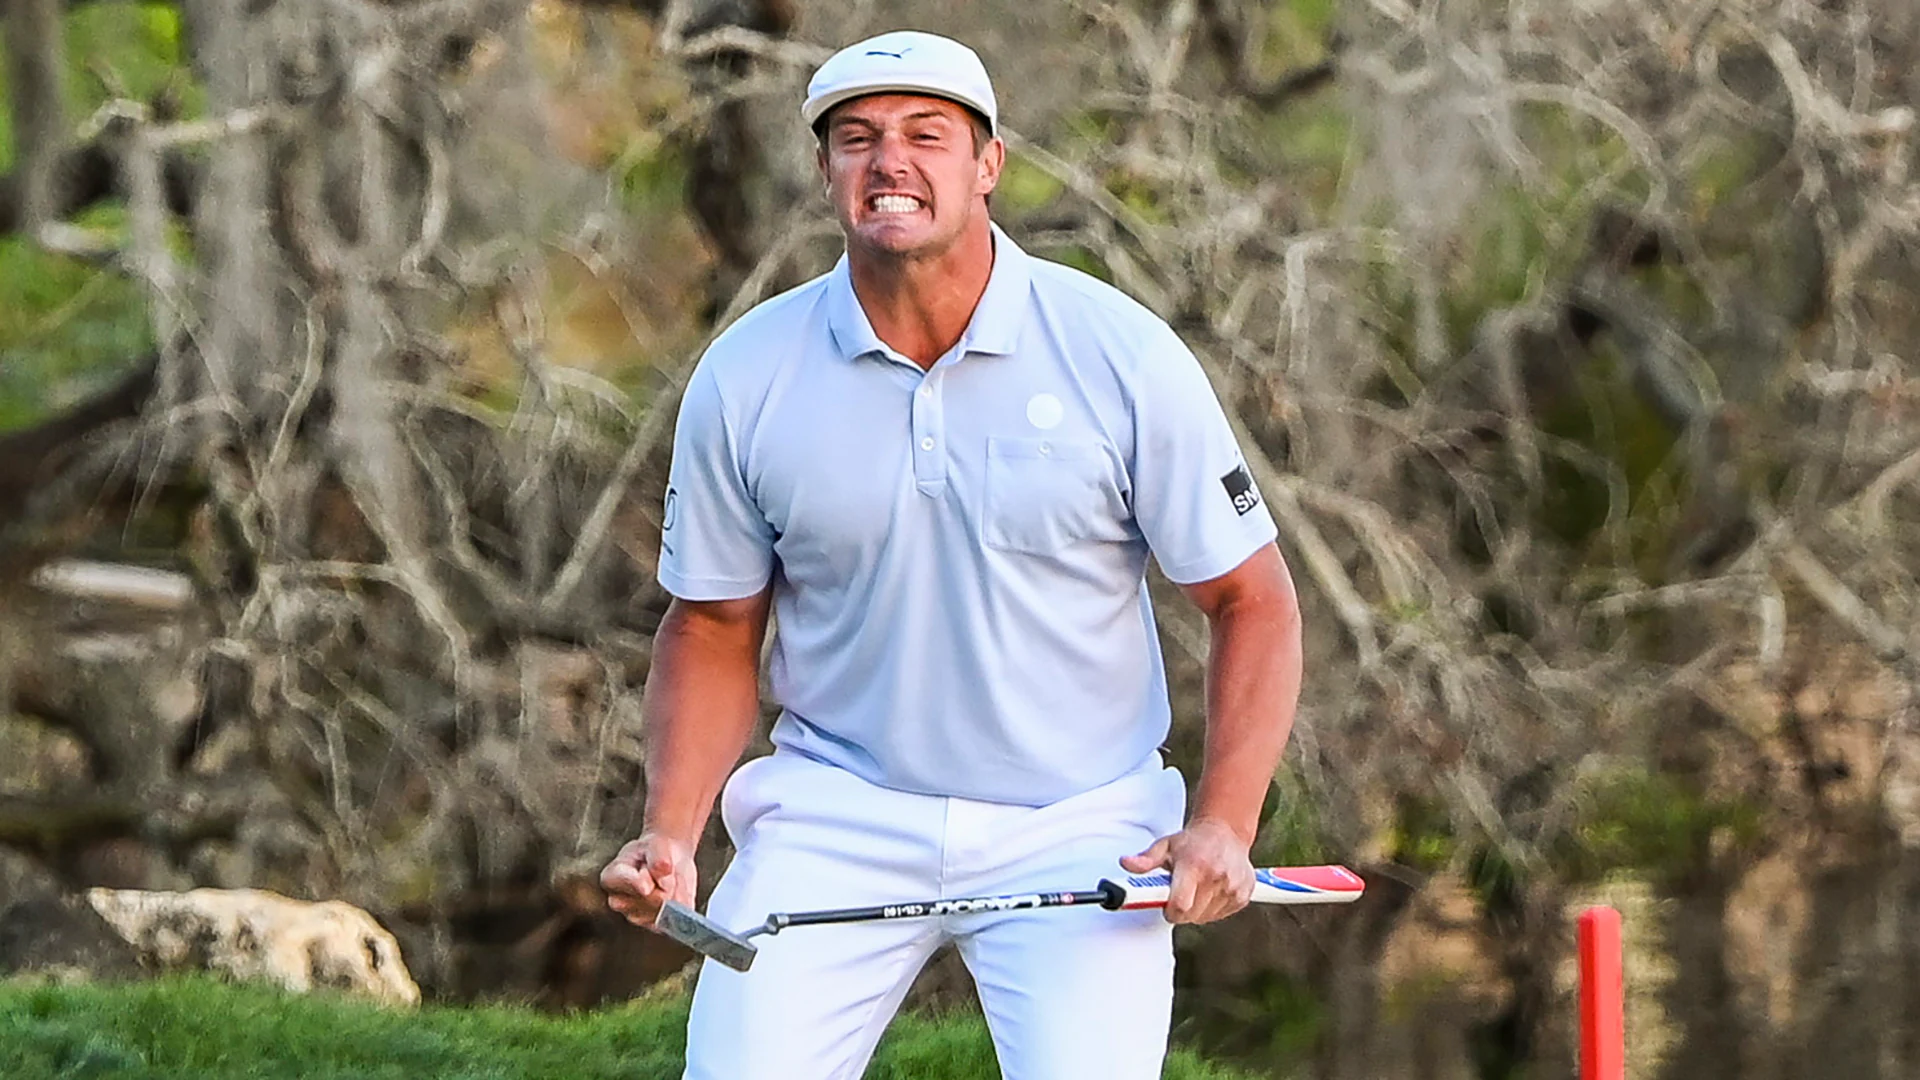 Most-read stories on GolfChannel.com in 2021: A whole lot of Bryson DeChambeau